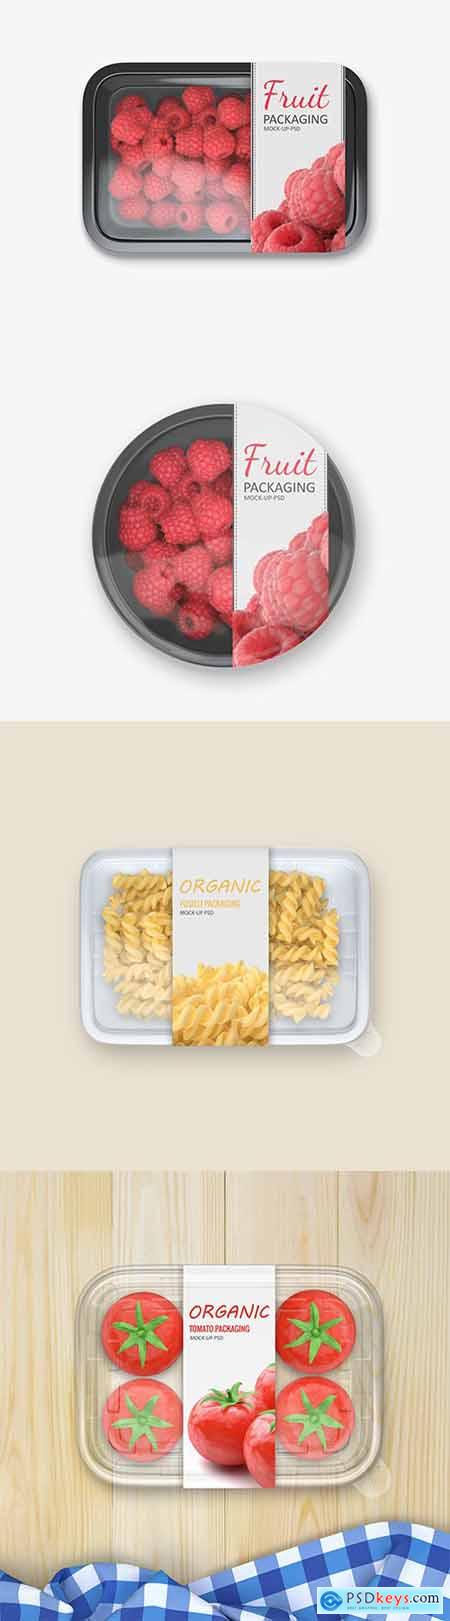 Plastic Food Container PSD Mock up Set » Free Download Photoshop Vector Stock image Via Torrent ...